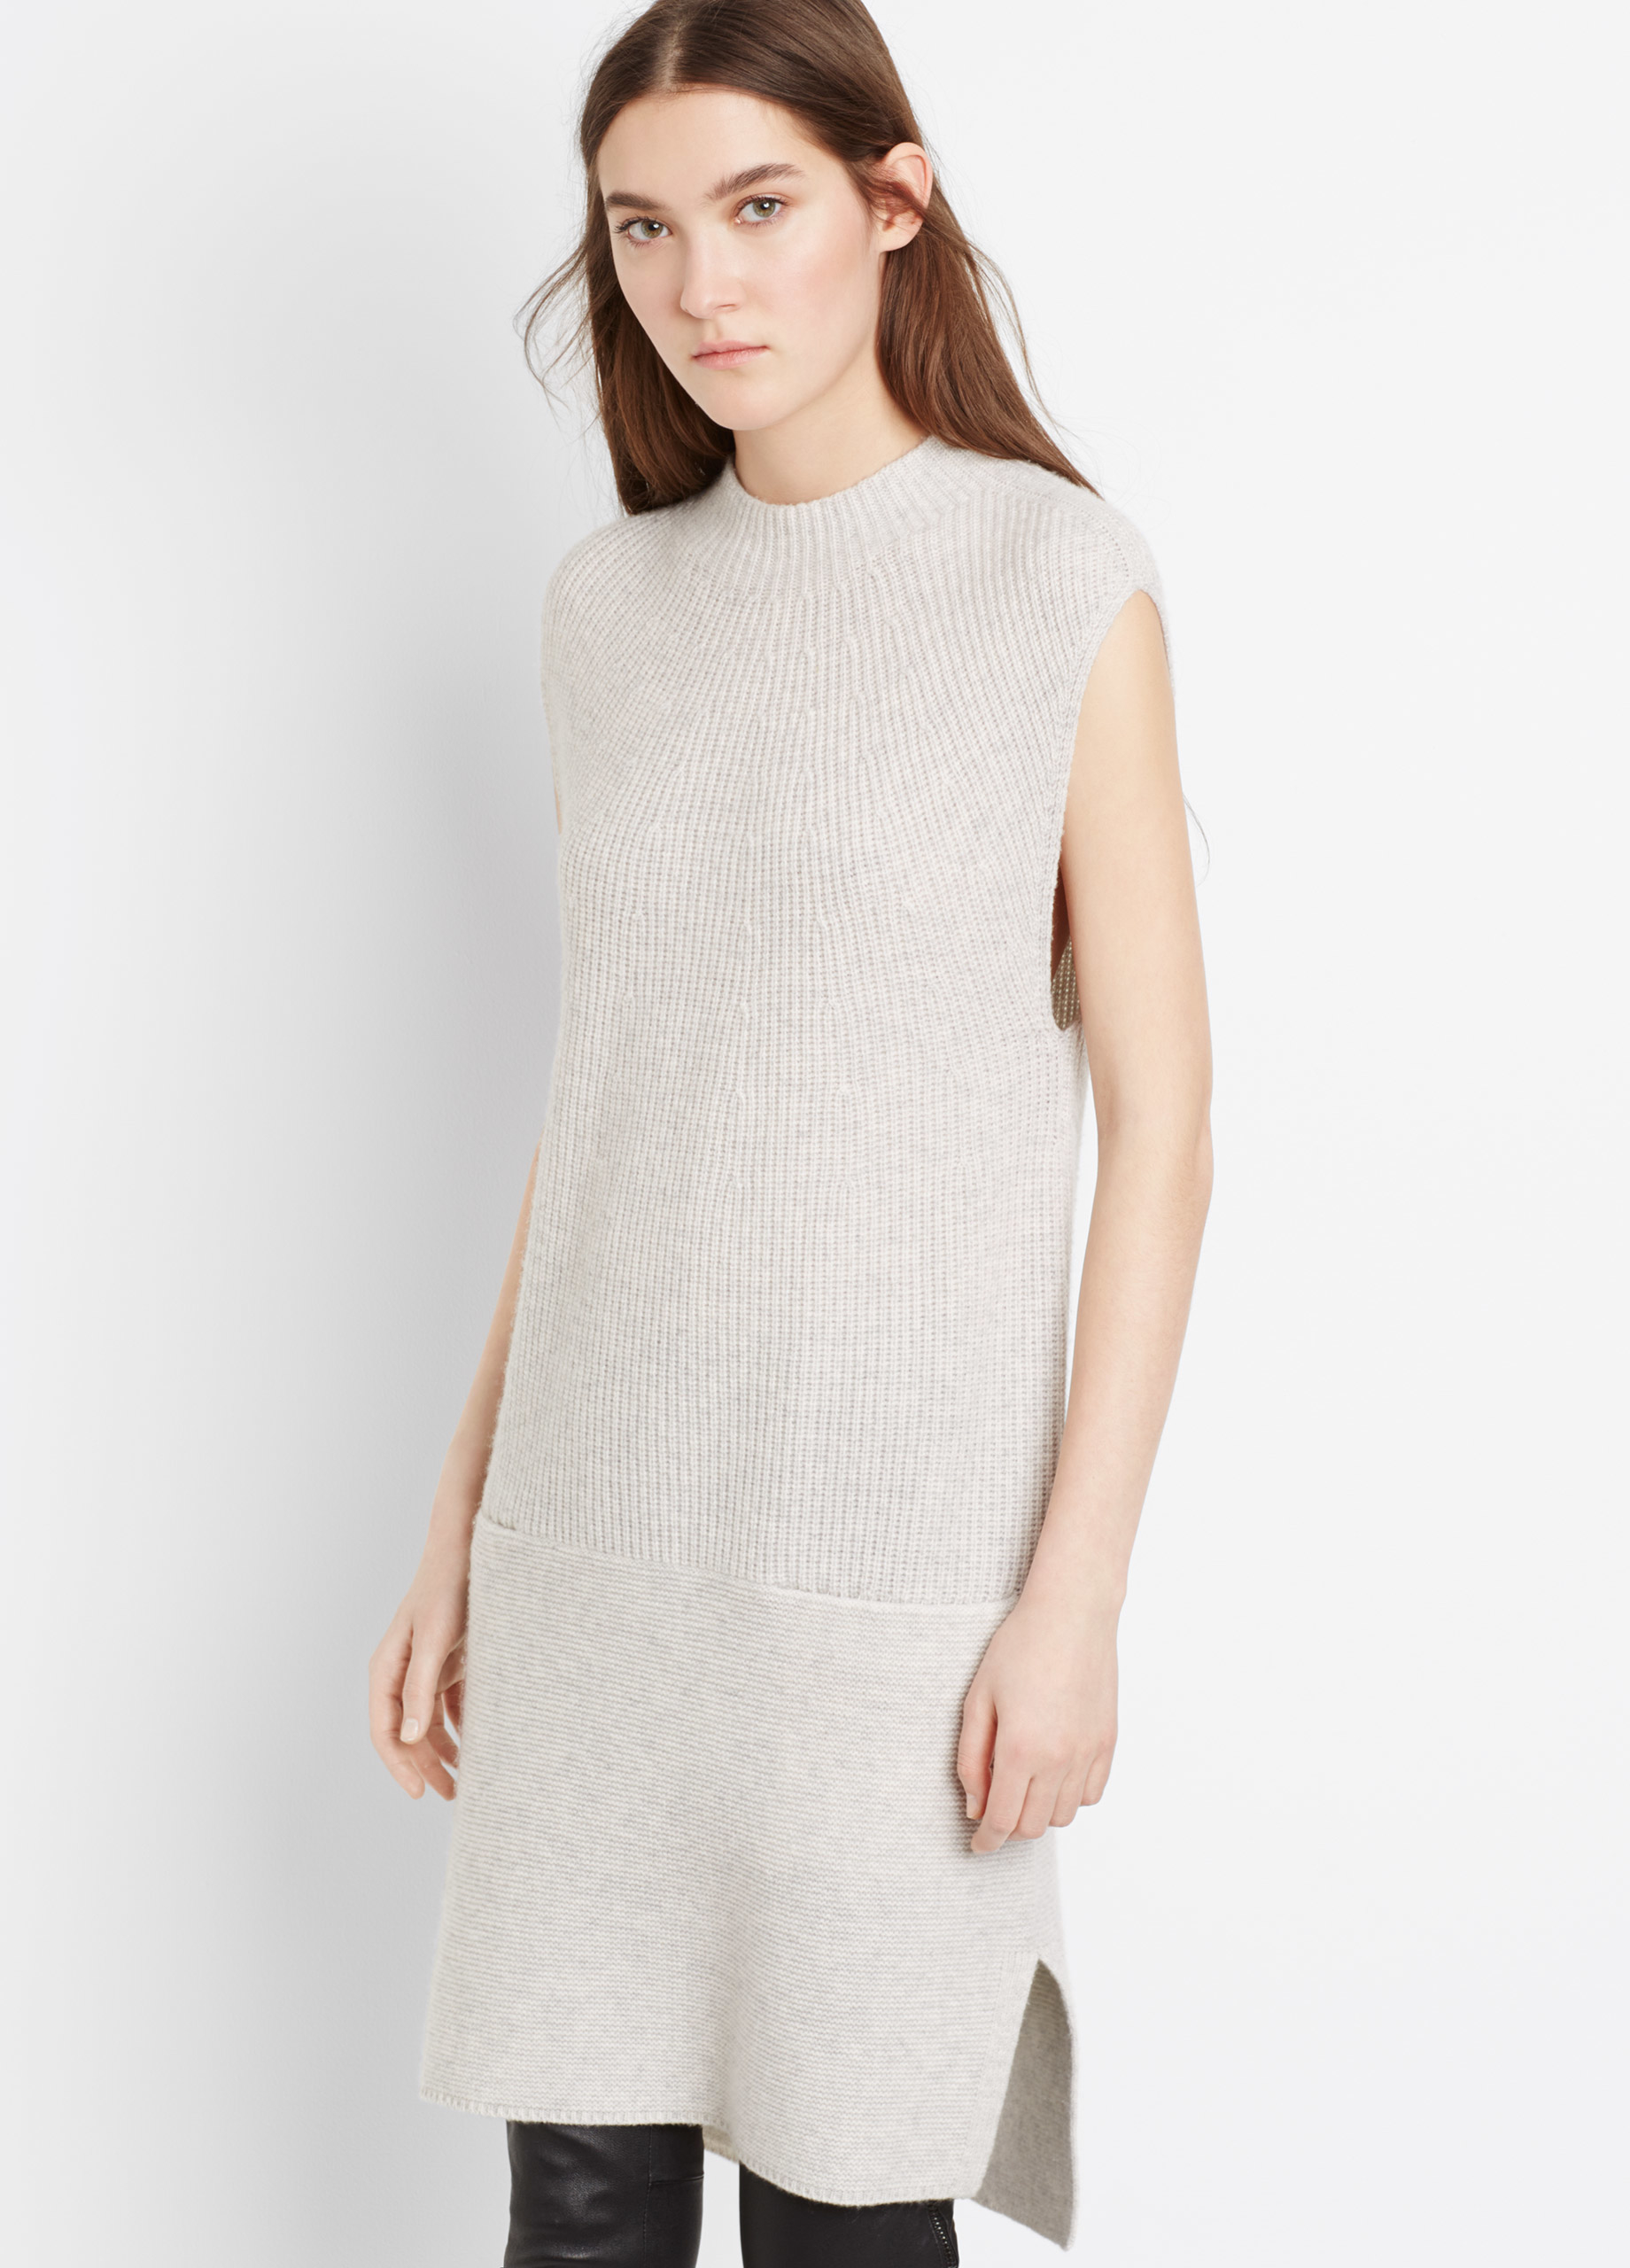 Vince Wool Cashmere Directional Rib Sweater Dress in Gray | Lyst